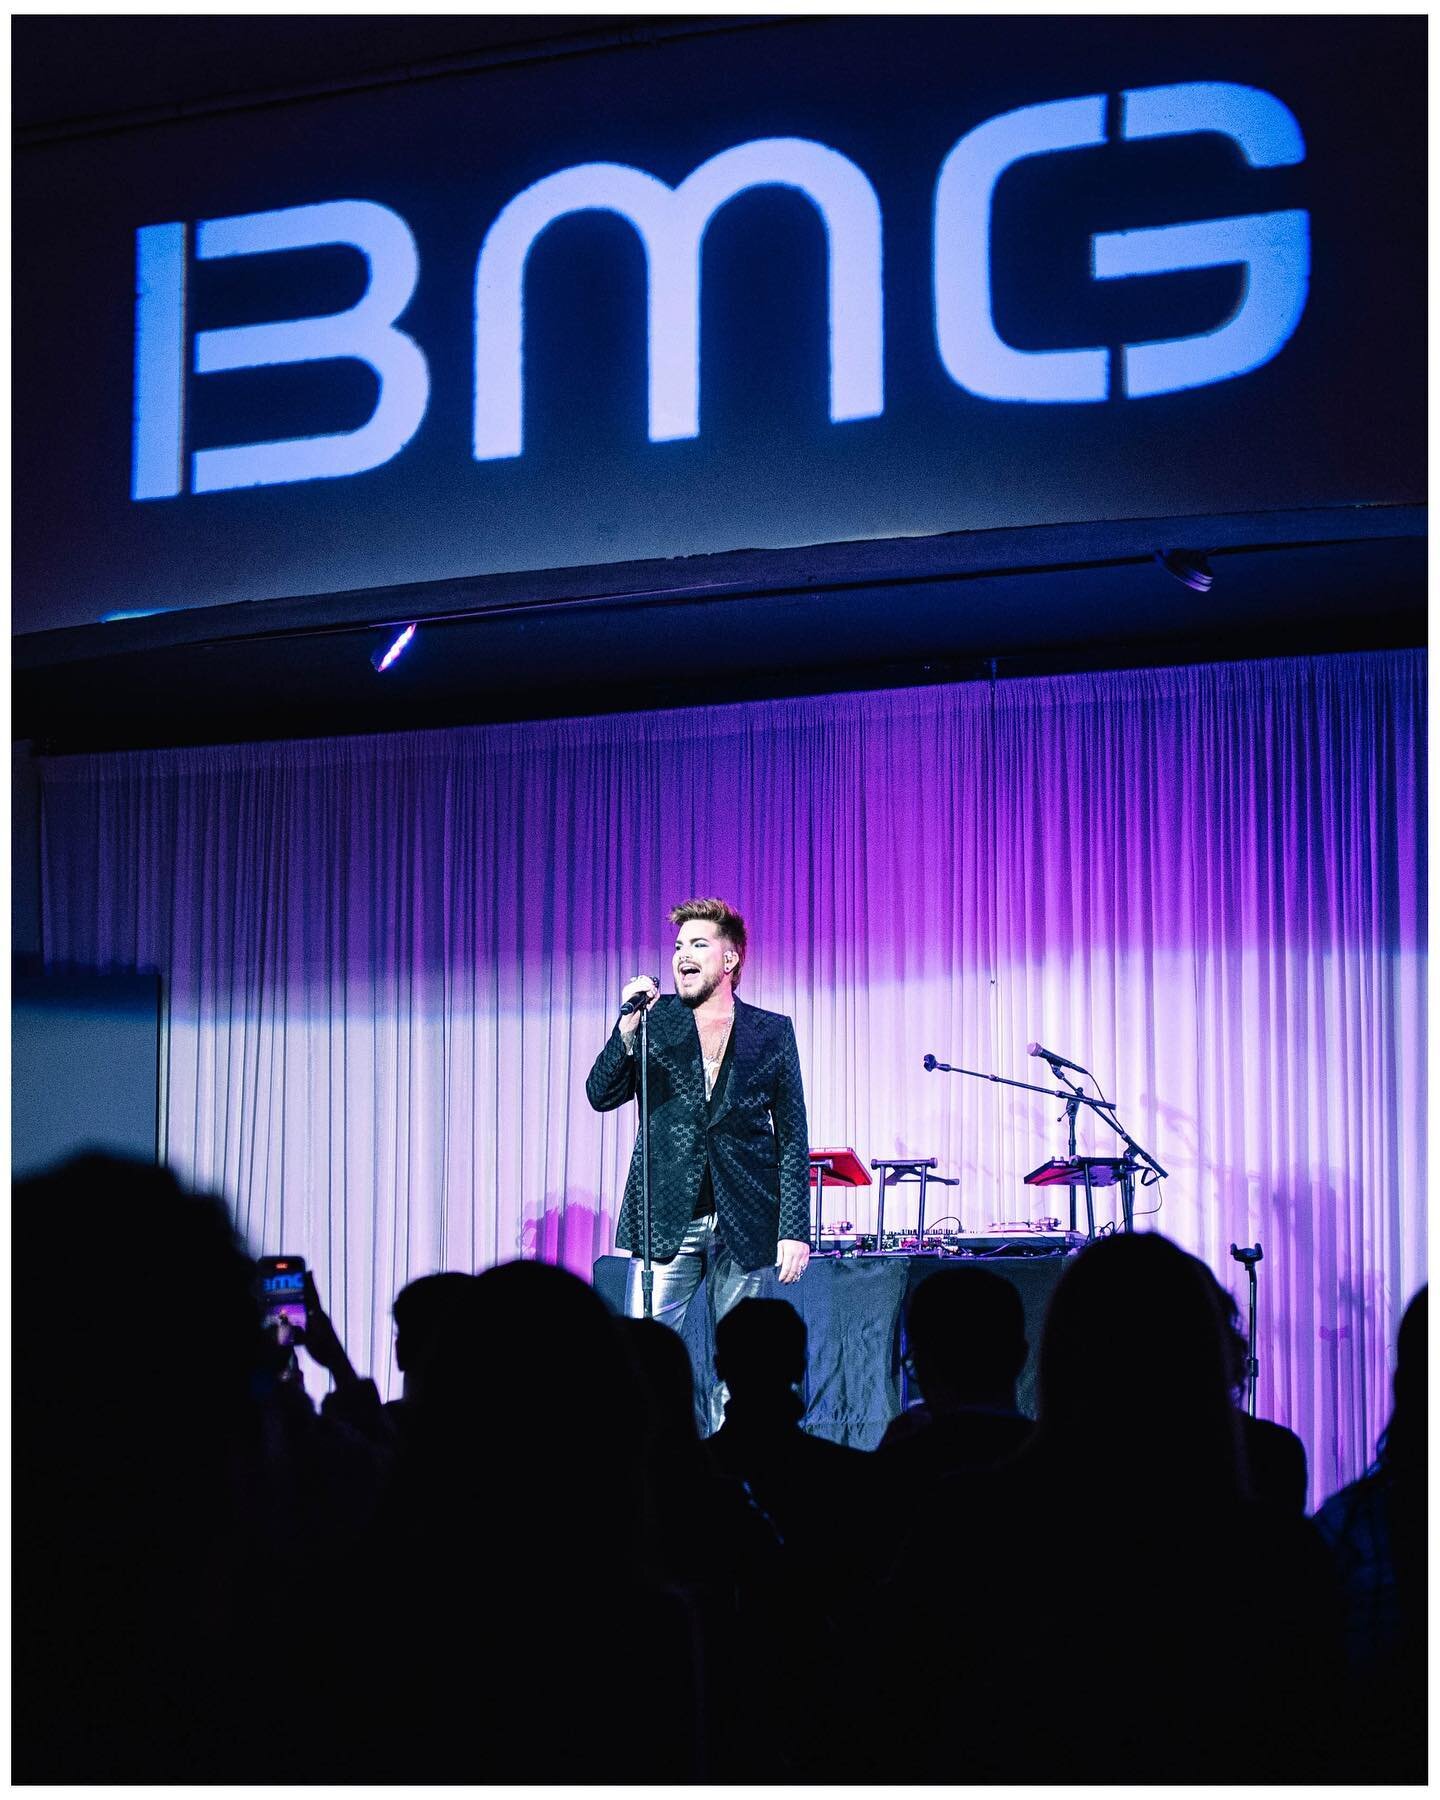 Had an absolute blast at the #BMG Pre-Grammy party on Wednesday, thanks a ton for the invite @bmg_us @thenewbmg 🙌🏻 @logic @adamlambert @iamlpofficial 
📷 @thenosyhungarian 
.
.
.
.
.
#adamlambert #logic #iamlpofficial #lp #grammys #pregrammy #gramm